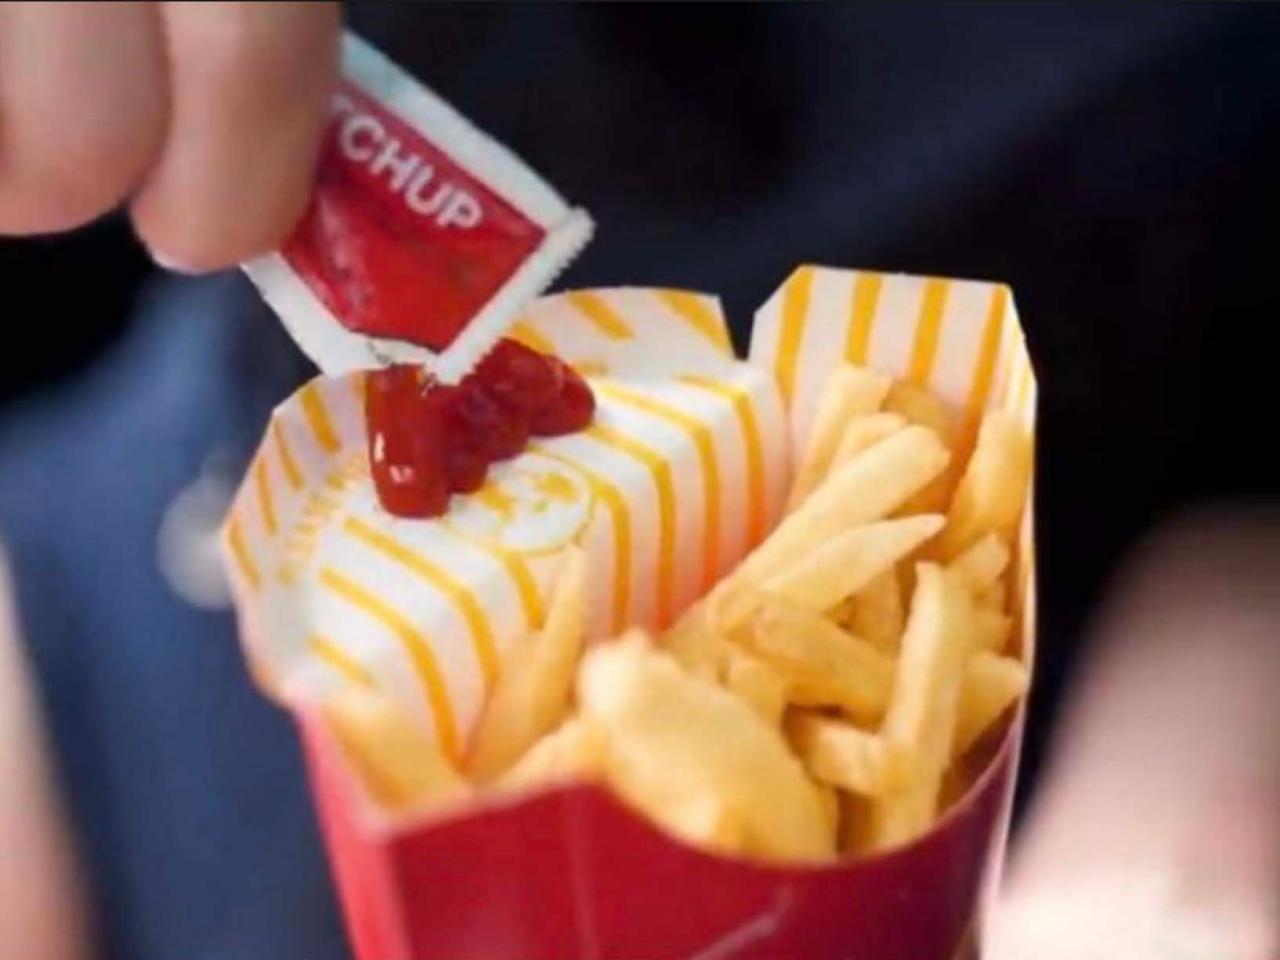 Is There a Ketchup Holder Built Into Your Fry Box?